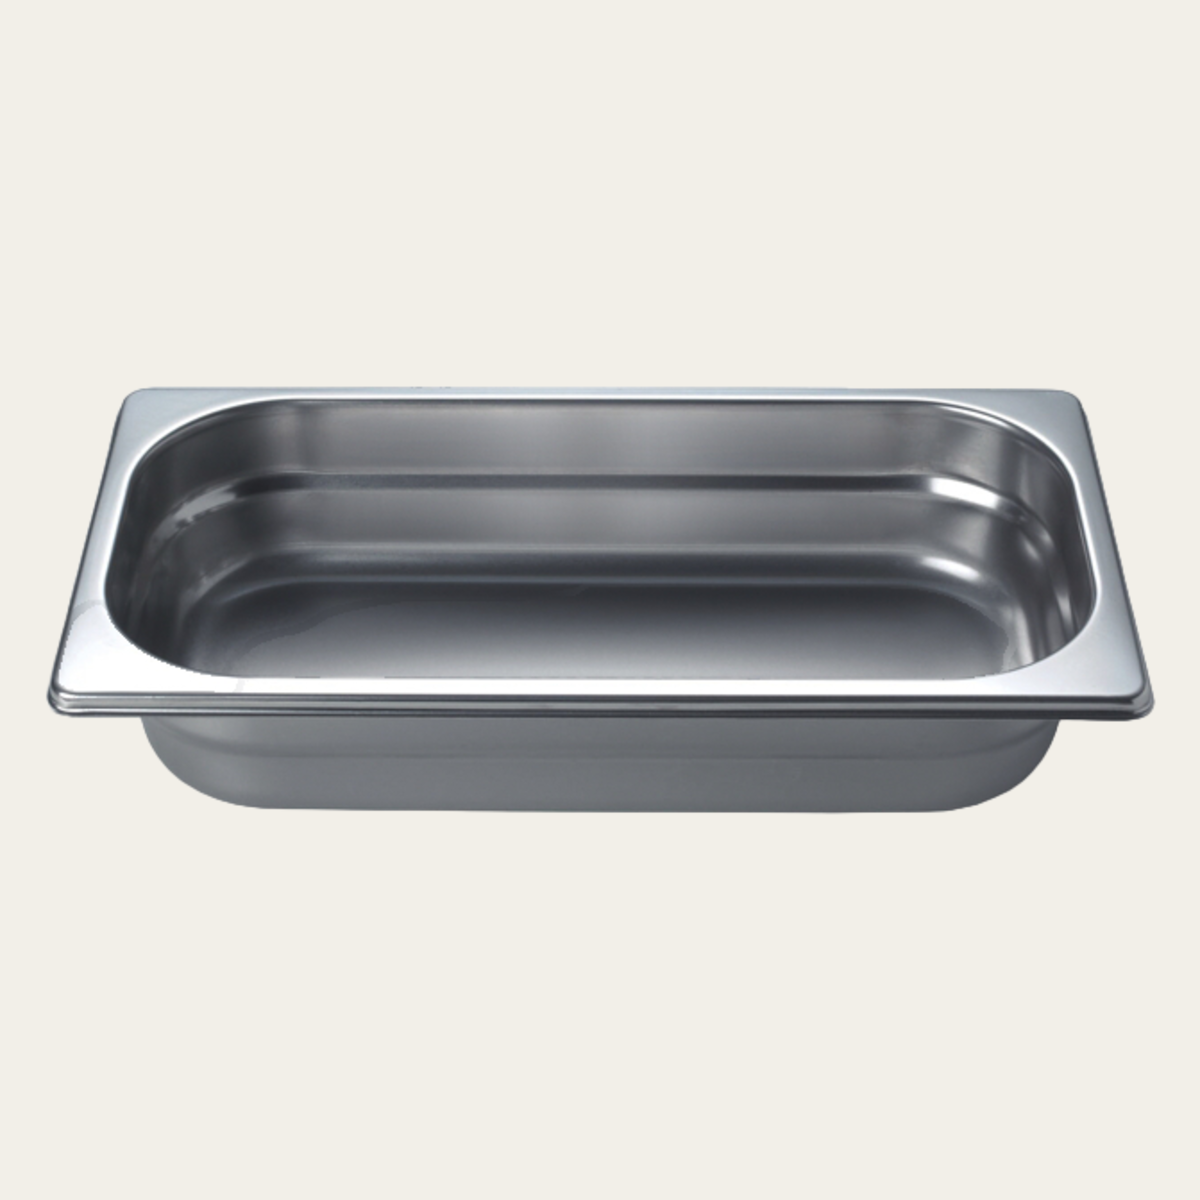 Cooking tray GN1/3, height 65mm, unperforated, packed